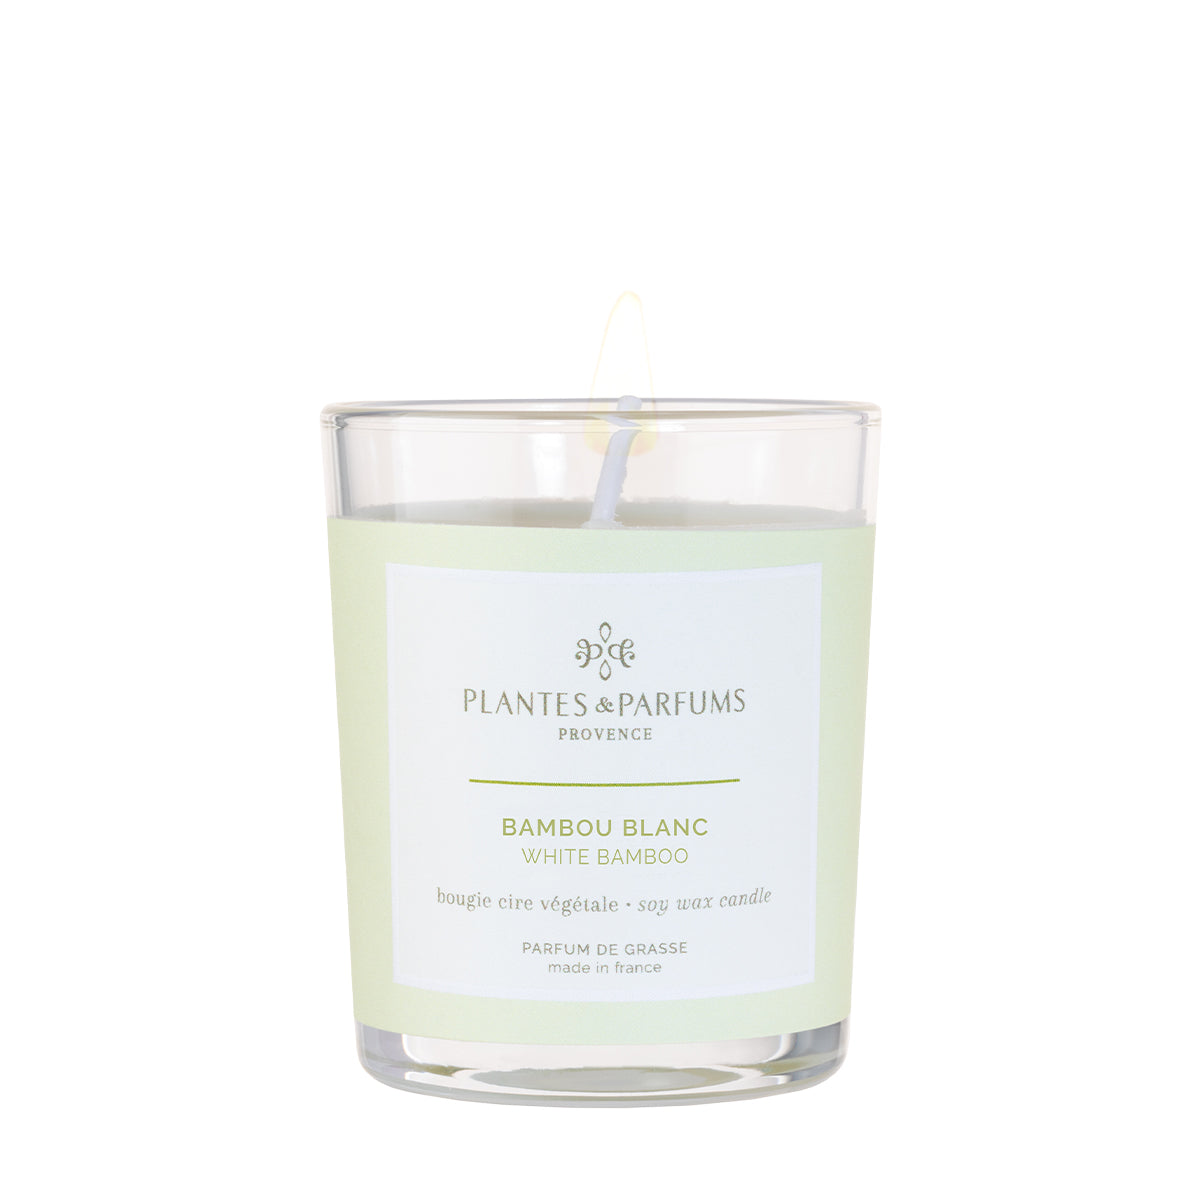 White Bamboo Vegetable Candle 75g